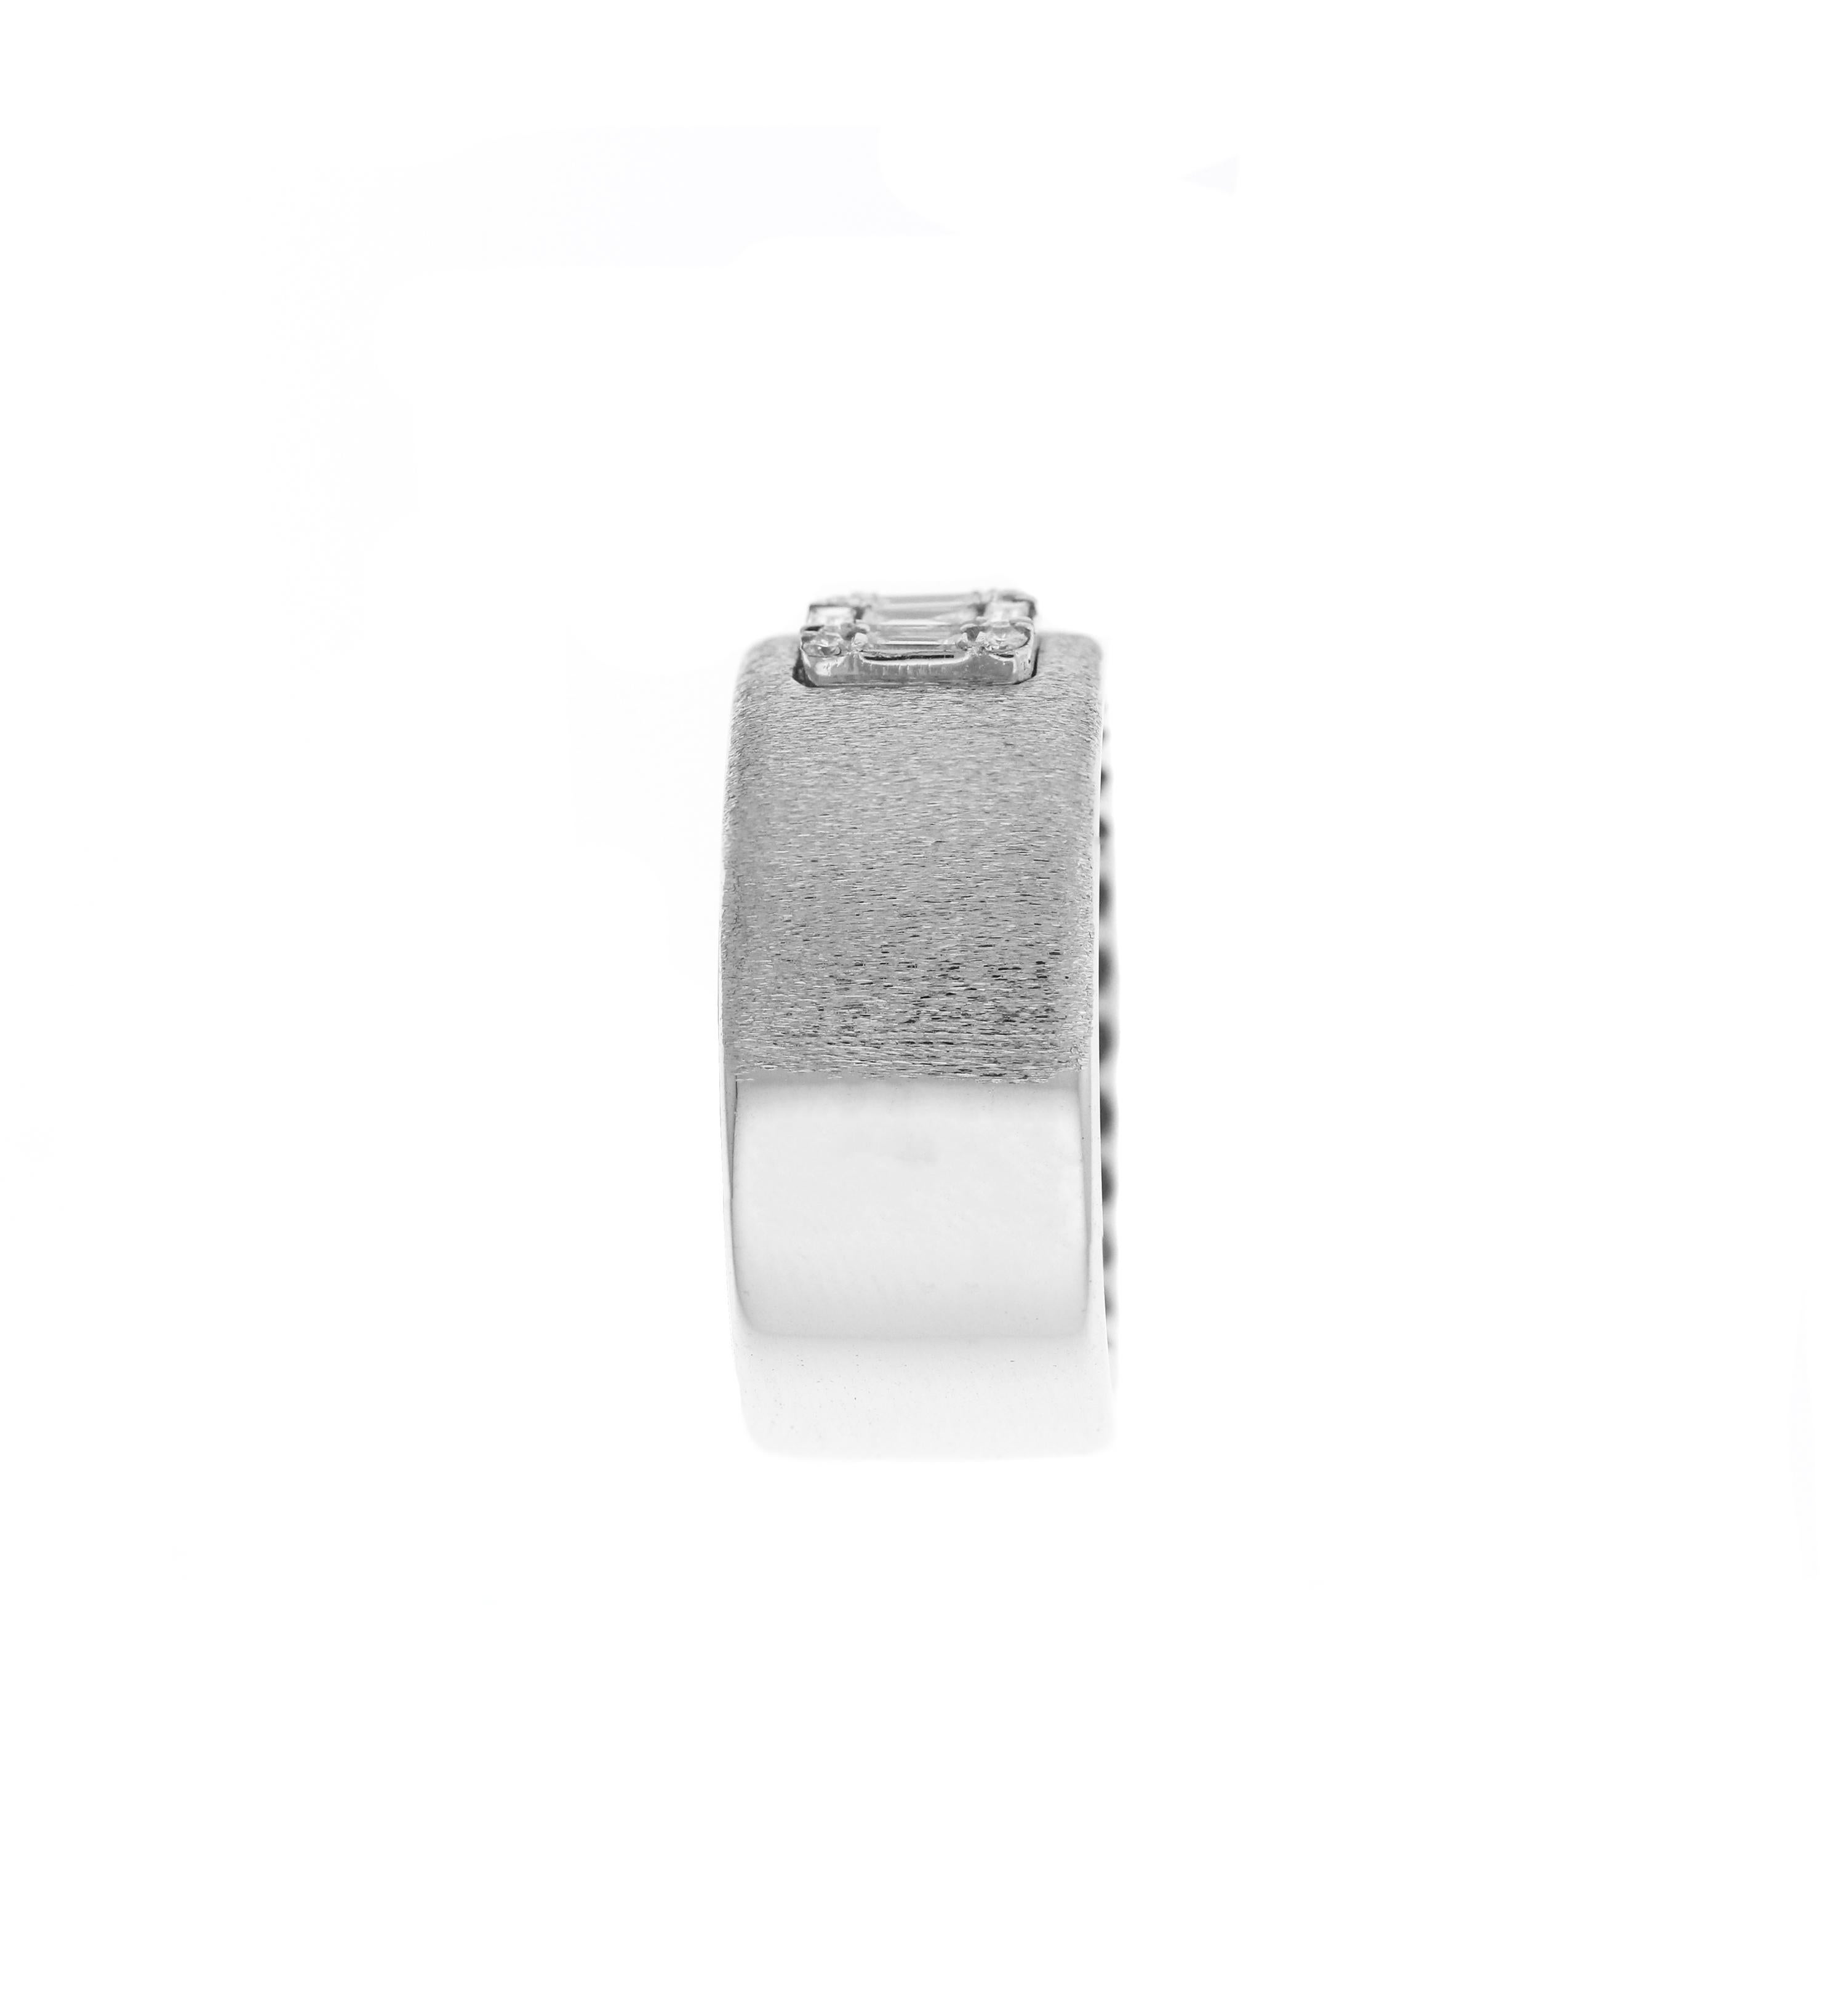 IF YOU ARE REALLY INTERESTED, CONTACT US WITH ANY REASONABLE OFFER. WE WILL TRY OUR BEST TO MAKE YOU HAPPY!

18K White Gold Matte Brushed Finish with Baguette and Round Diamonds Band Ring 

0.18 carat G color, VS clarity baguette and round